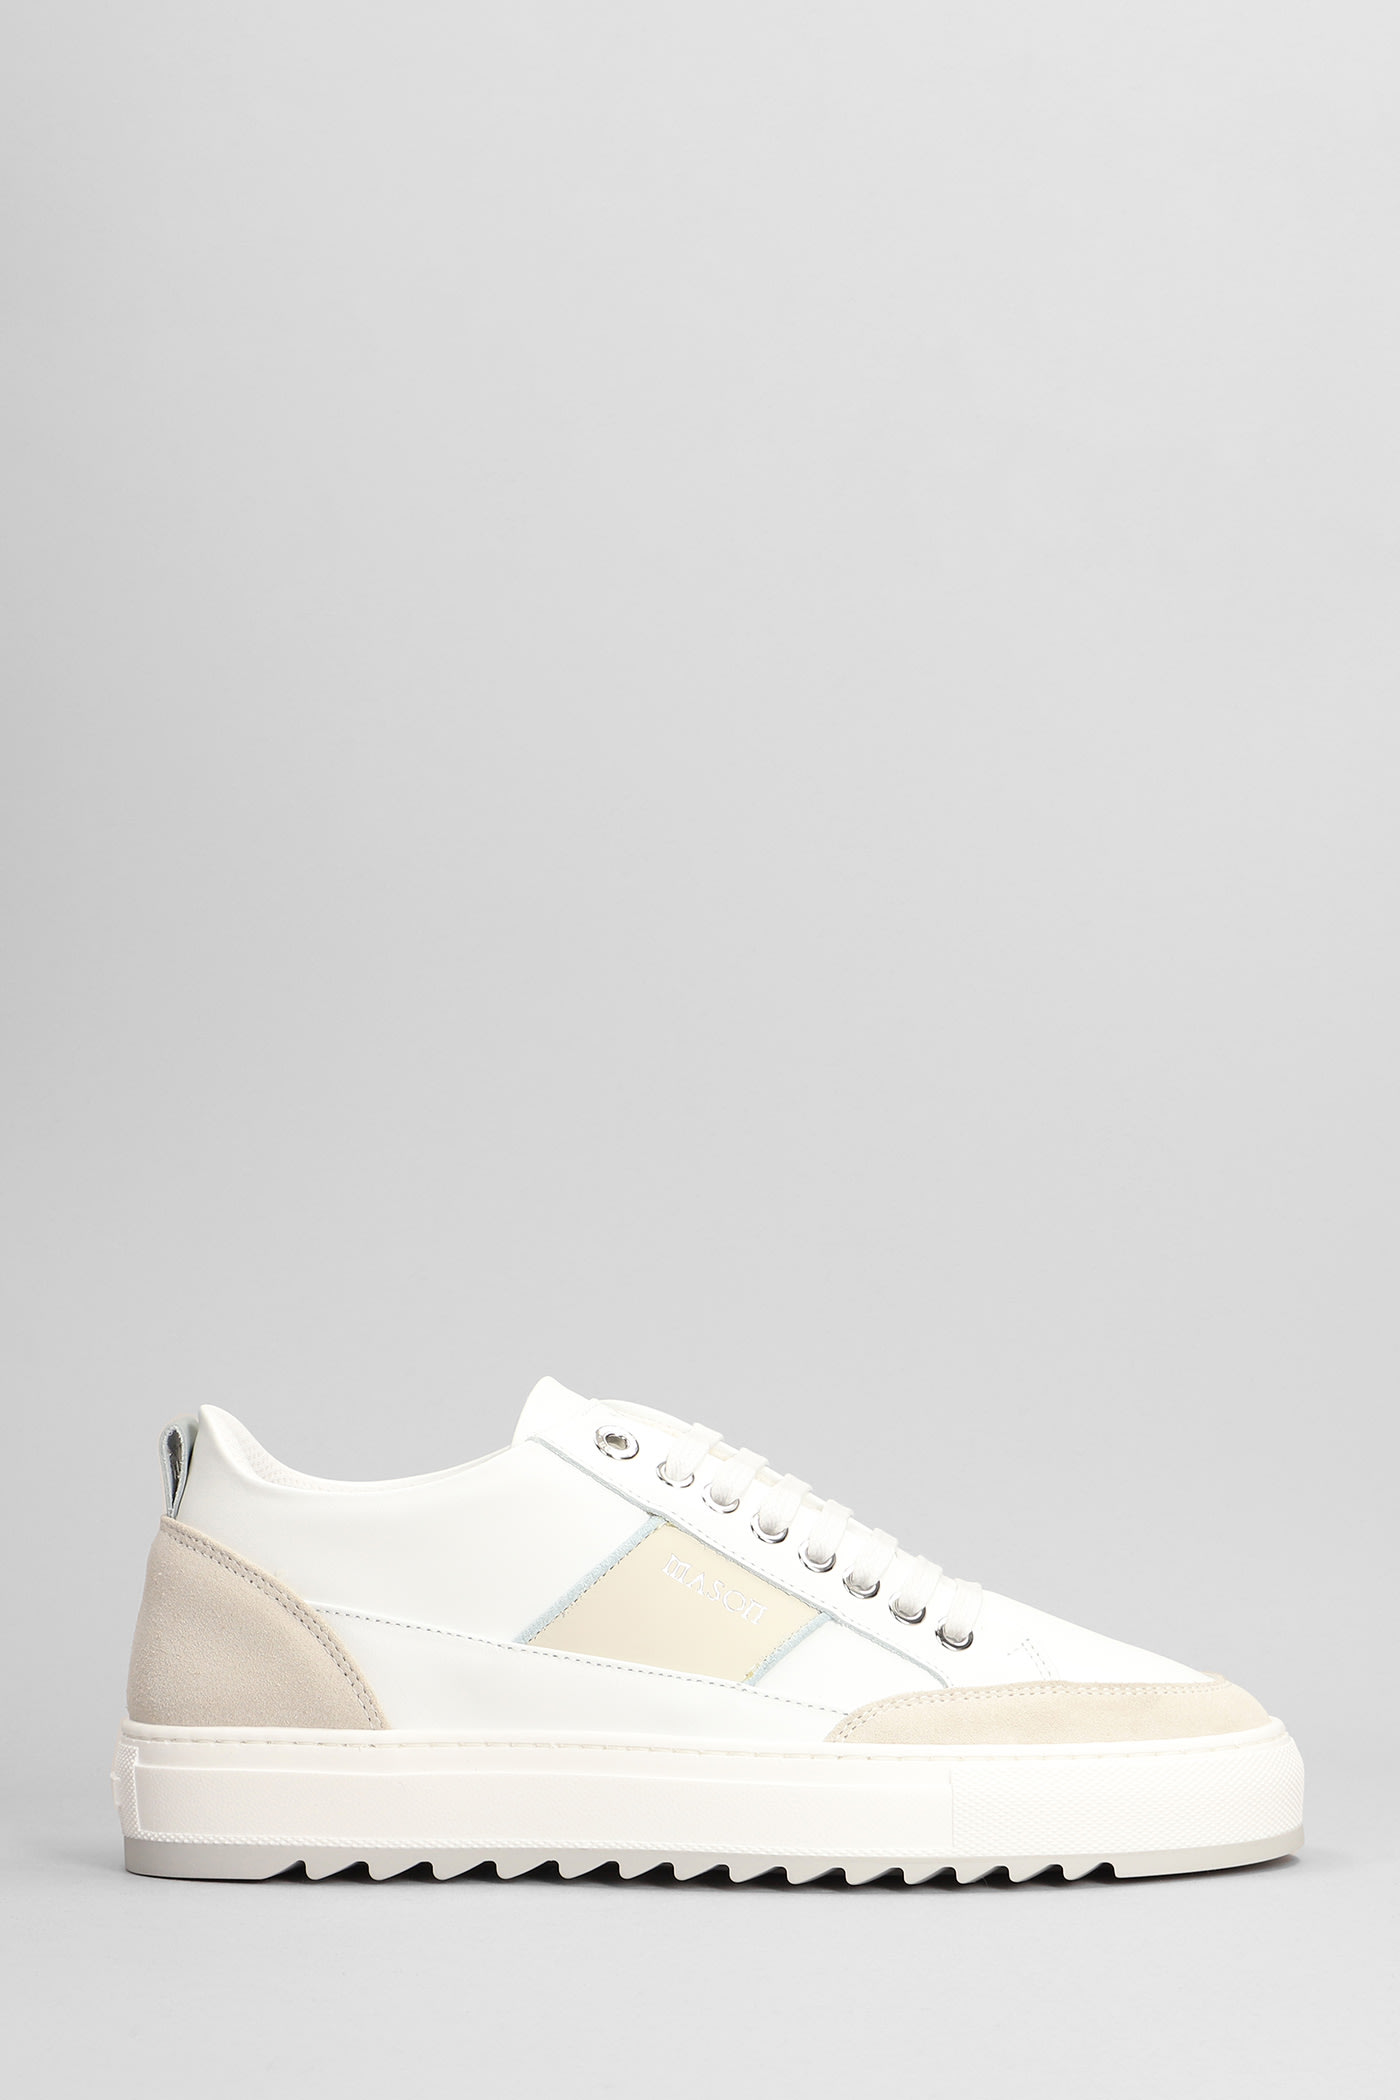 Mason Garments Tia Trainers In White Suede And Leather